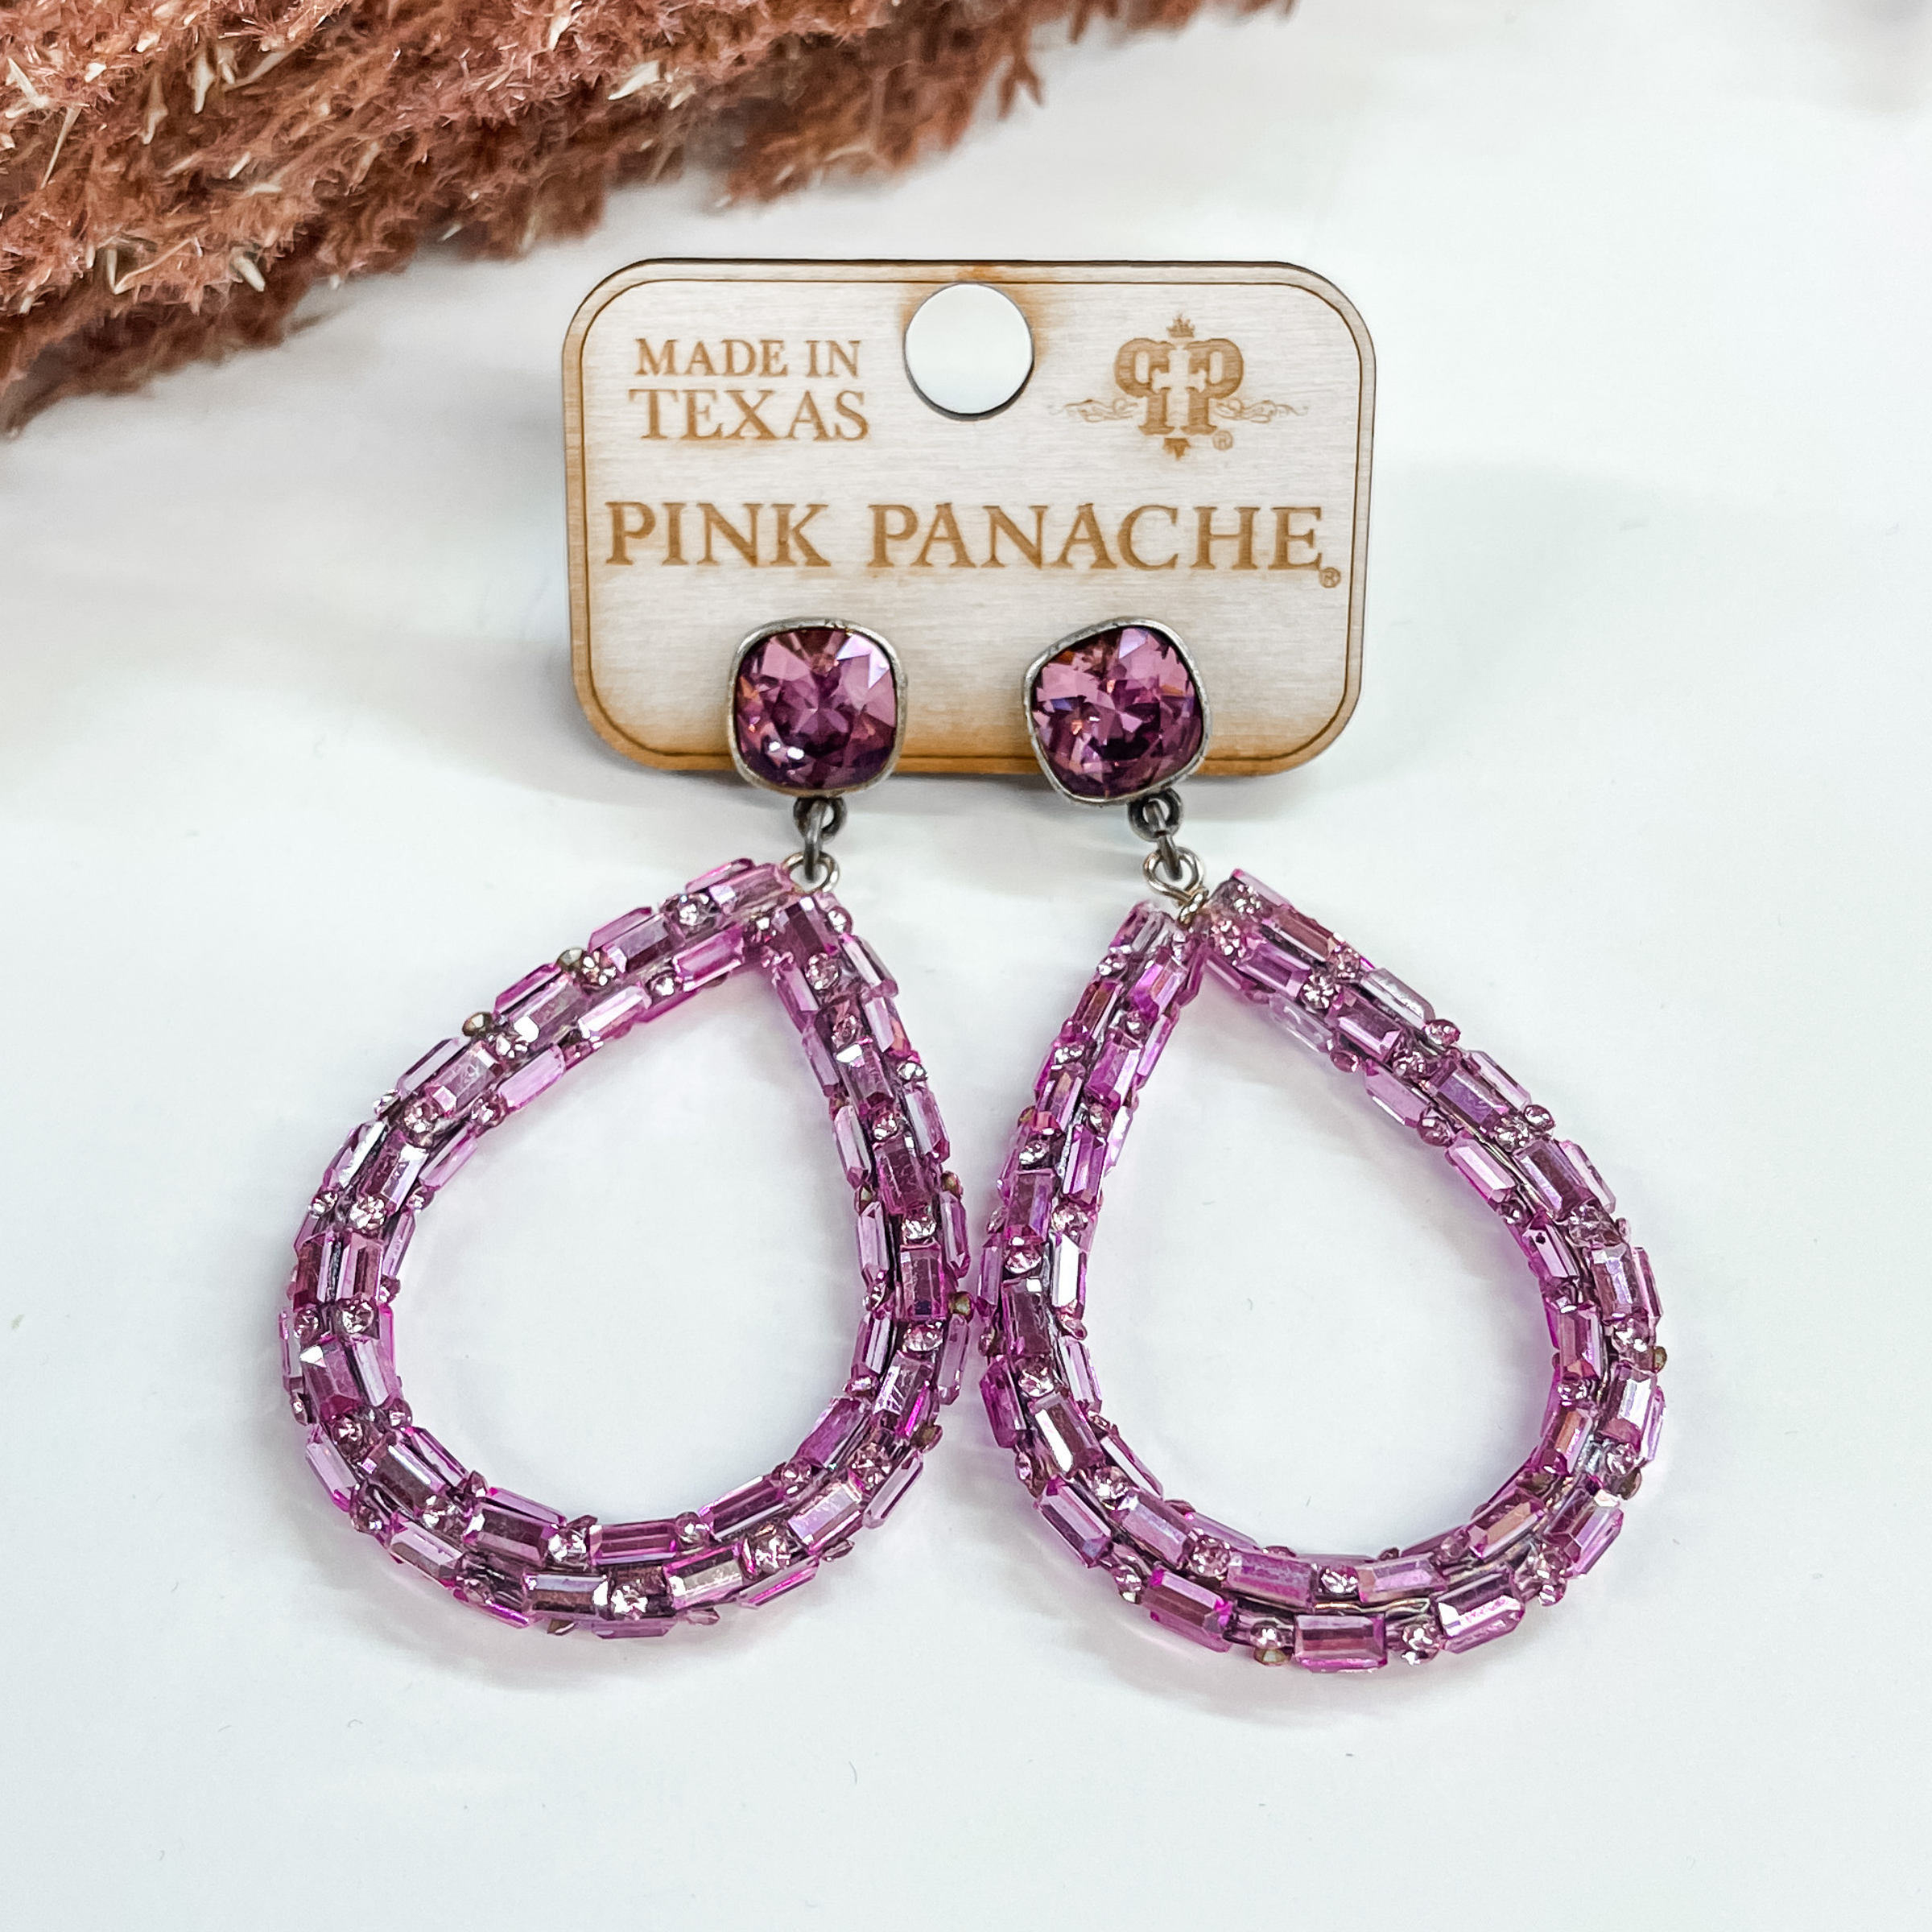 Purple cushion cut crystal studs with hanging  teardrop dangle in purple.These earrings  are pictured on a white background with a dark brown plant in the back as decor.